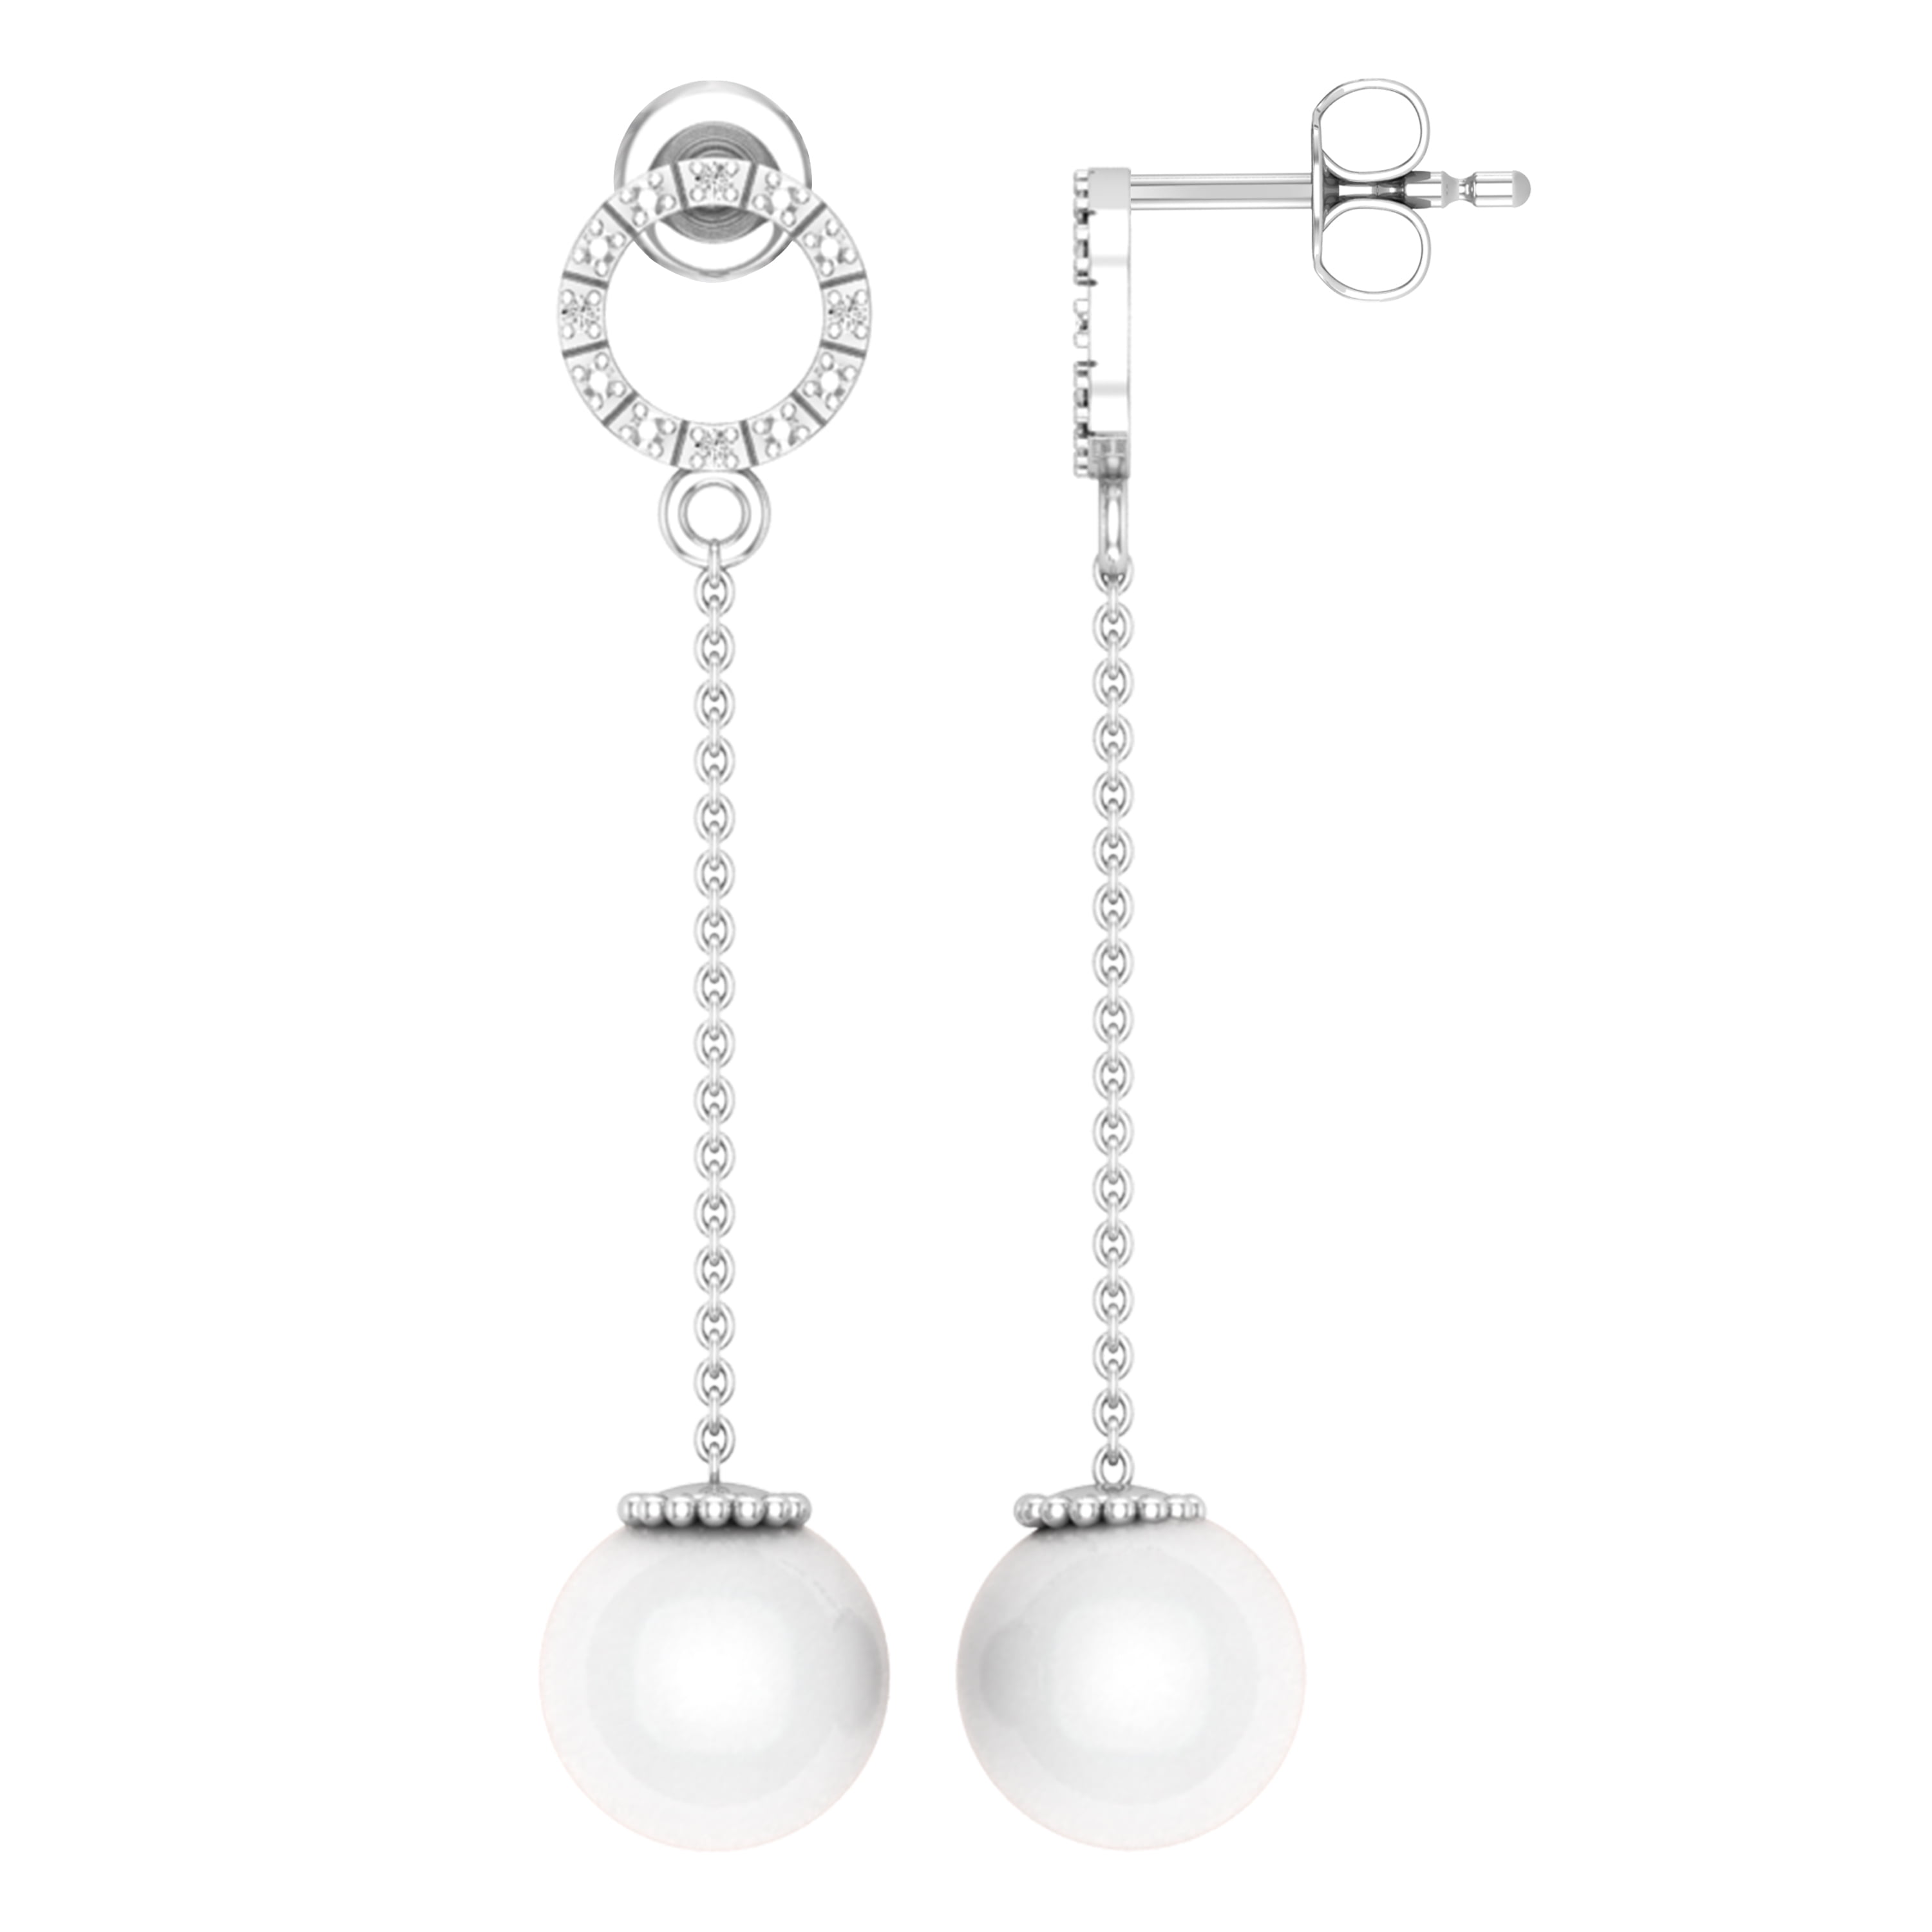 Details about   Charming Pearl Circles Chandelier Long Nice 925 Sterling Silver Earrings Jewelry 